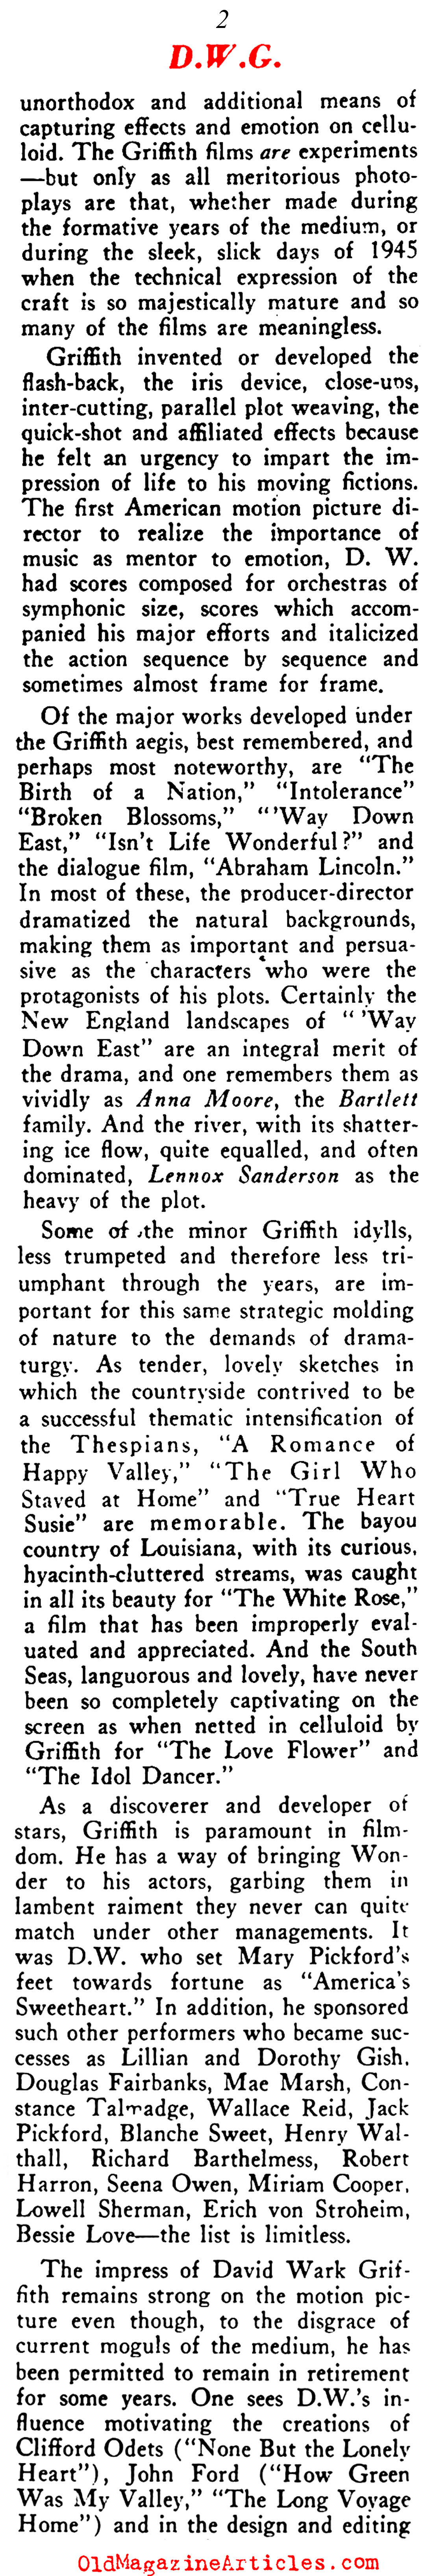 A Salute to D.W. Griffith (Rob Wagner's Script Magazine, 1945)